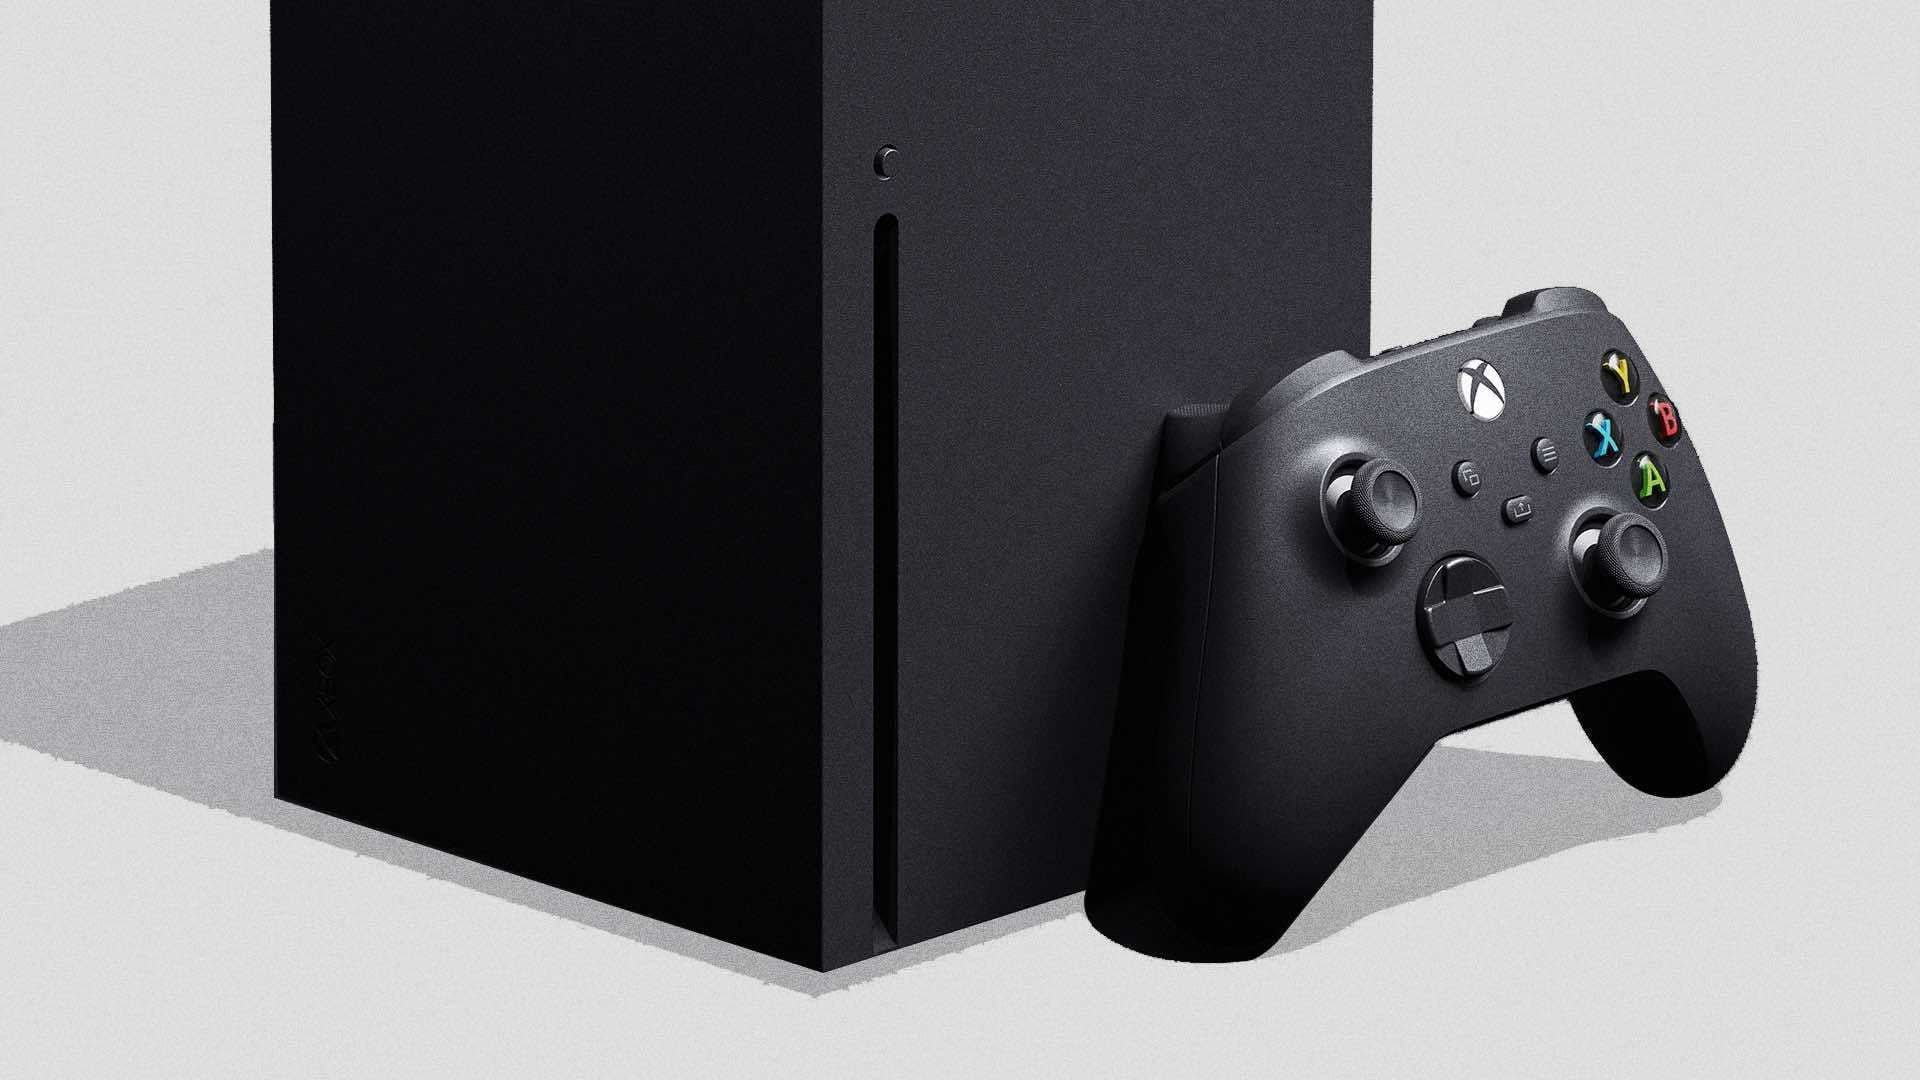 Xbox Series X will play thousands of games at launch